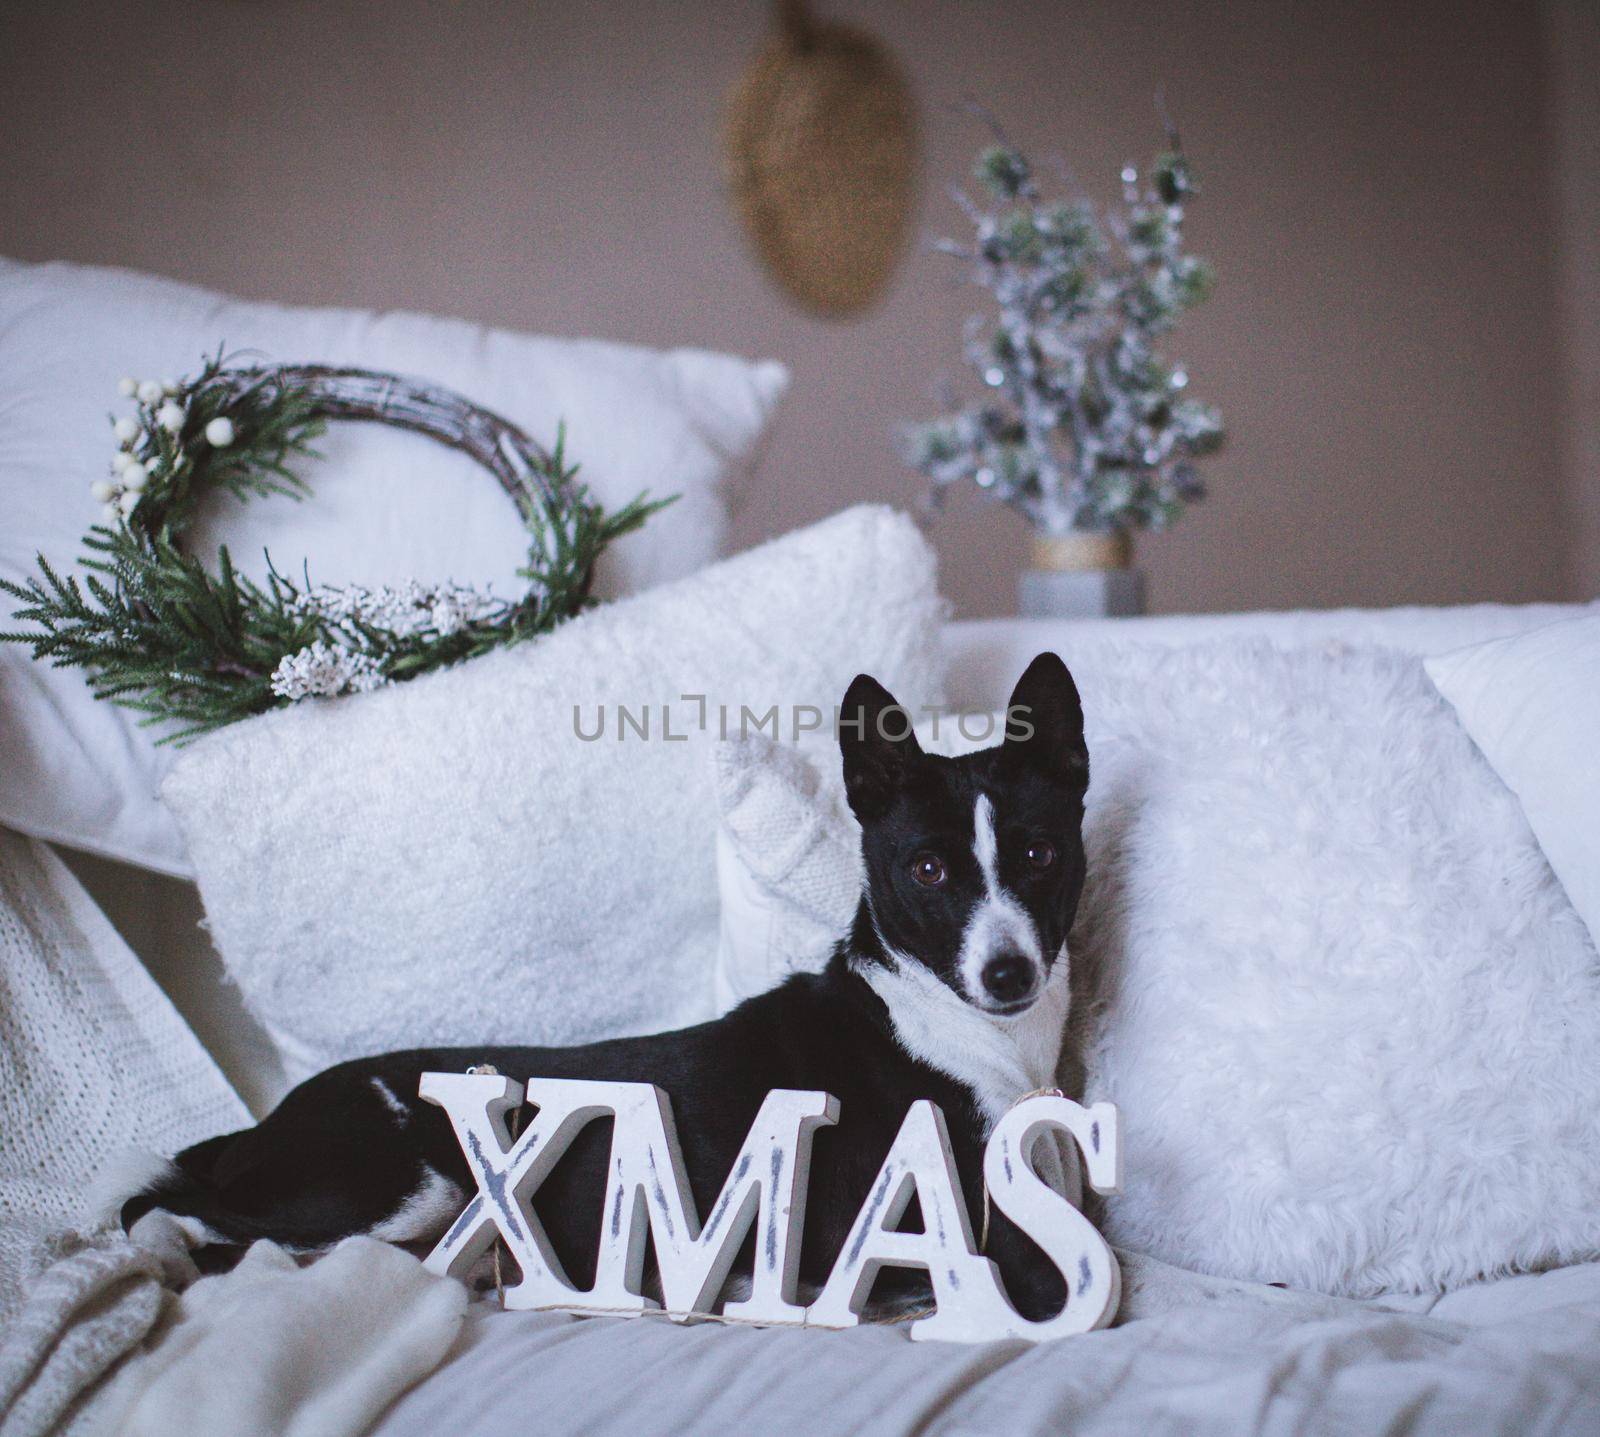 Pretty basenji dog in christmas or new year's decorations